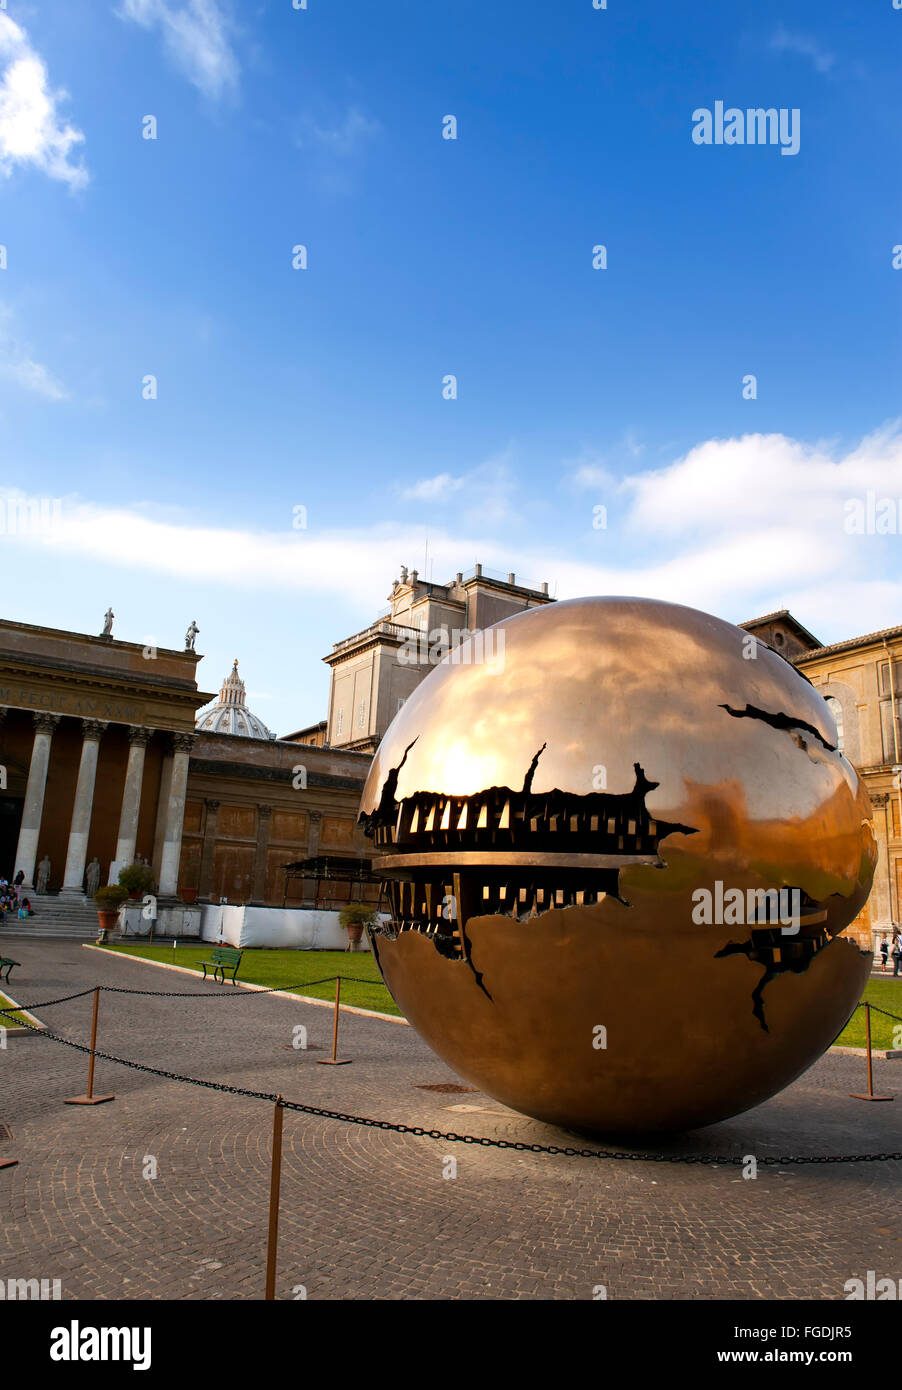 Court yard in Vatican. Sculpture the globe in court yard on September 20, 2010 in Vatican, Rome, Italy Stock Photo